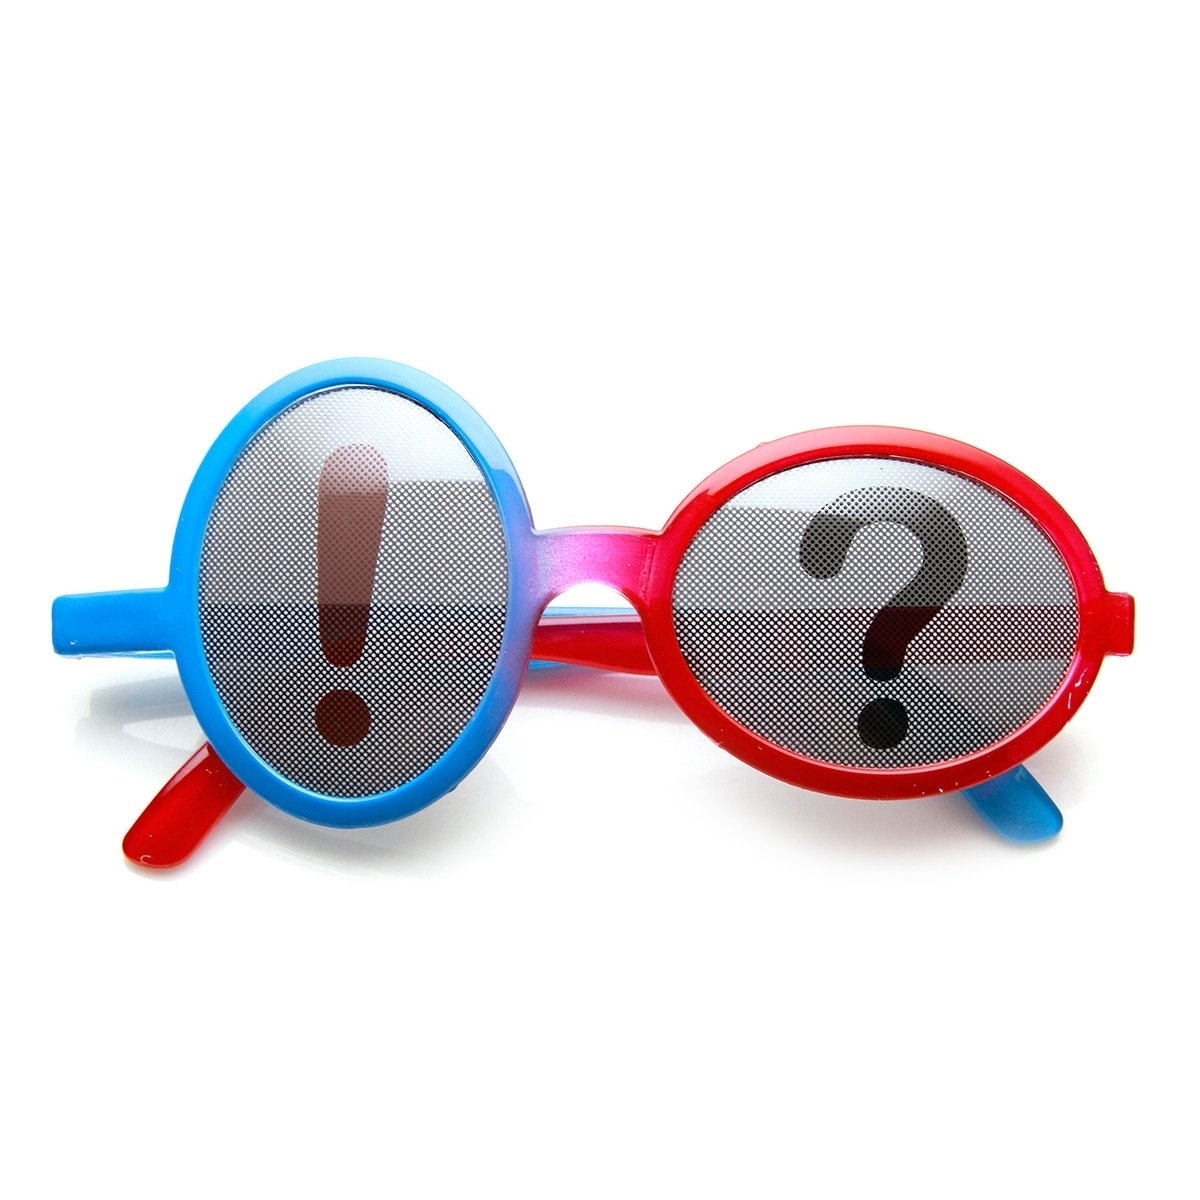 Exclamation Question Mark Punctuation Silly Party Novelty Glasses - Yellow-Red Smoke